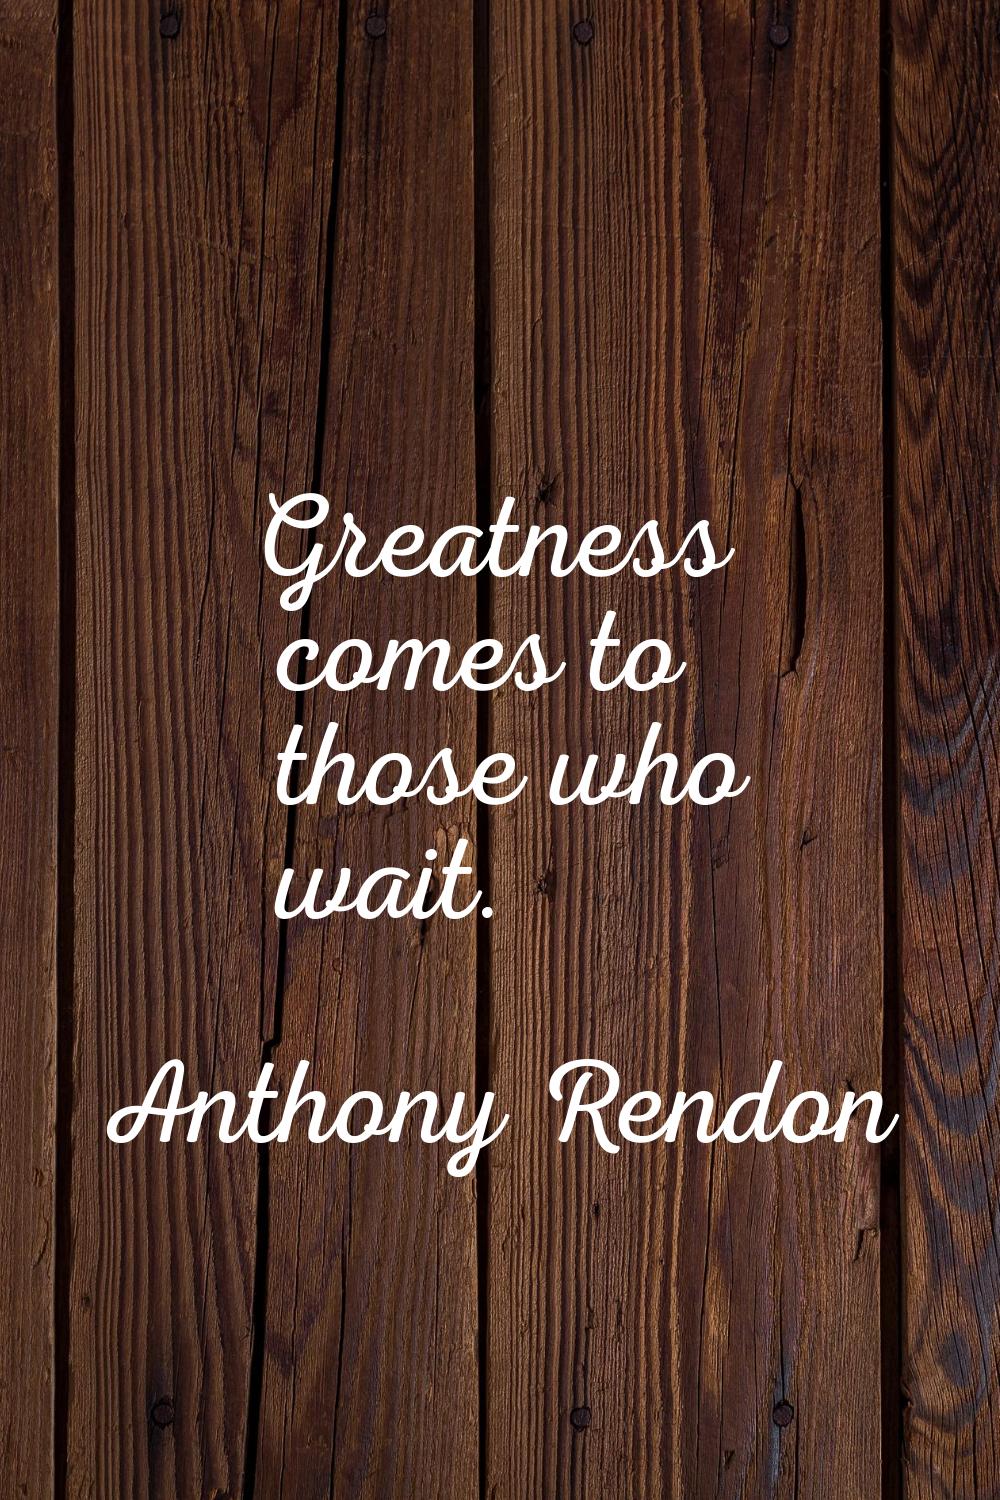 Greatness comes to those who wait.